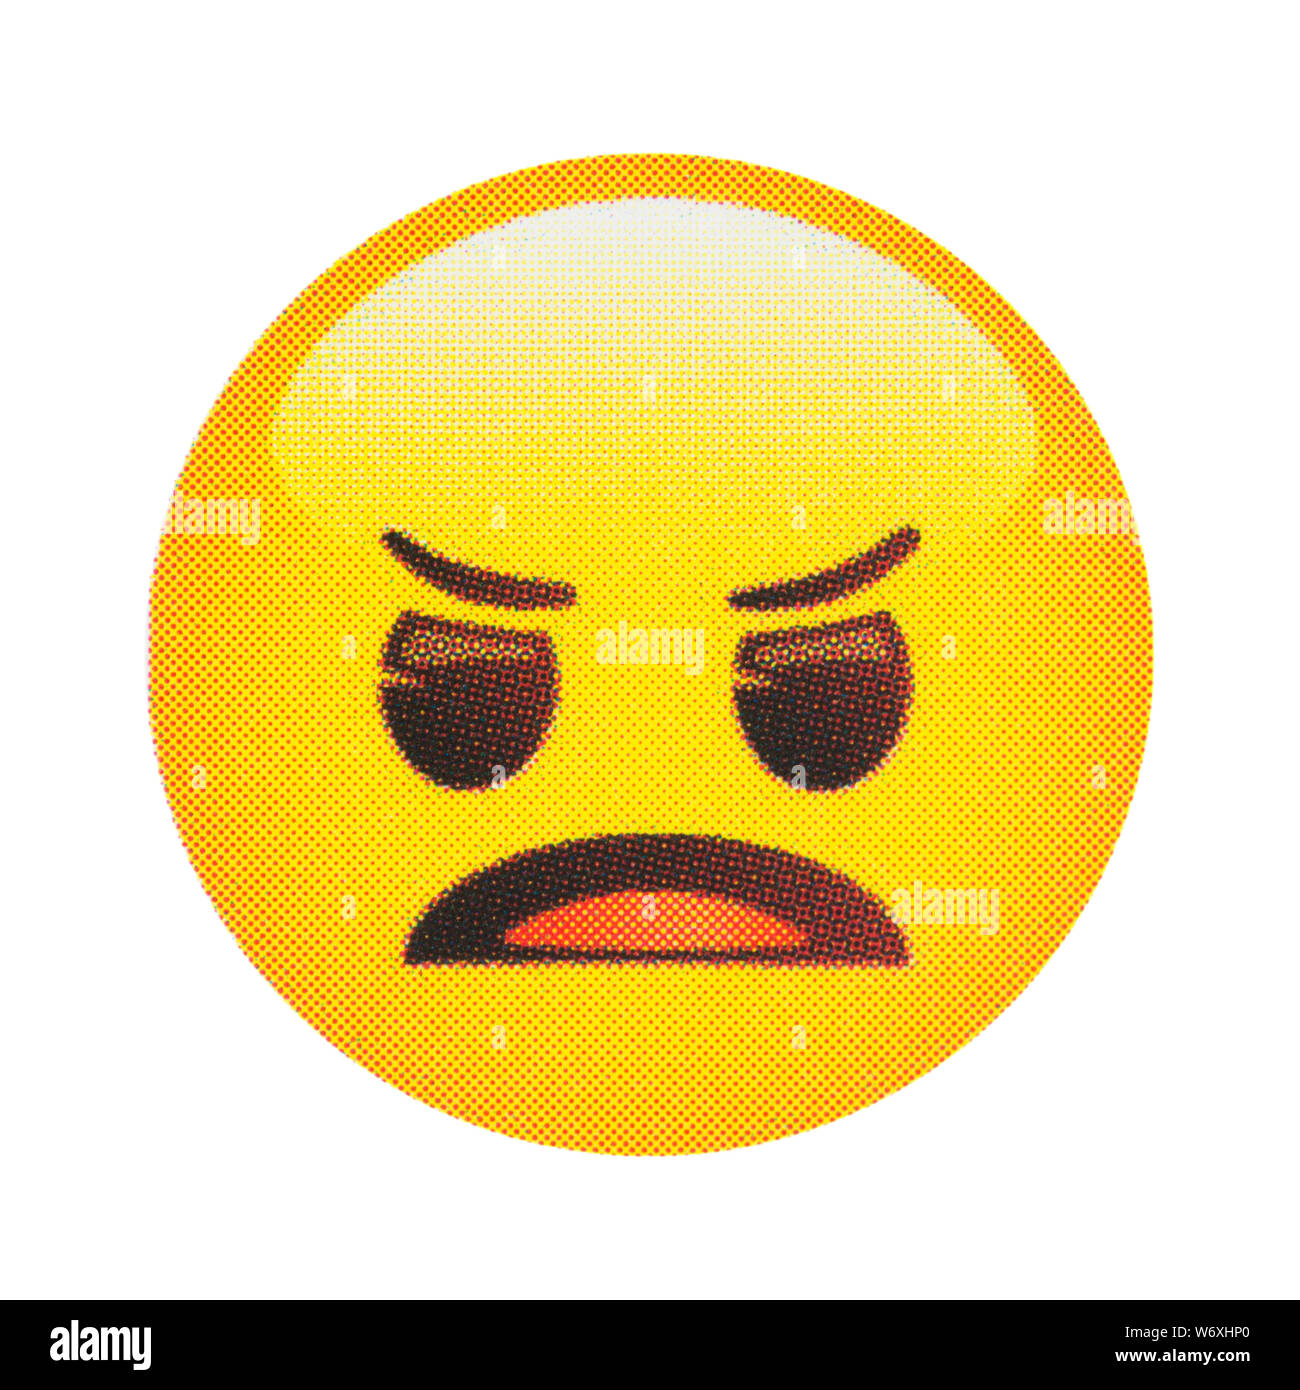 Angry face emoticon Stock Photo